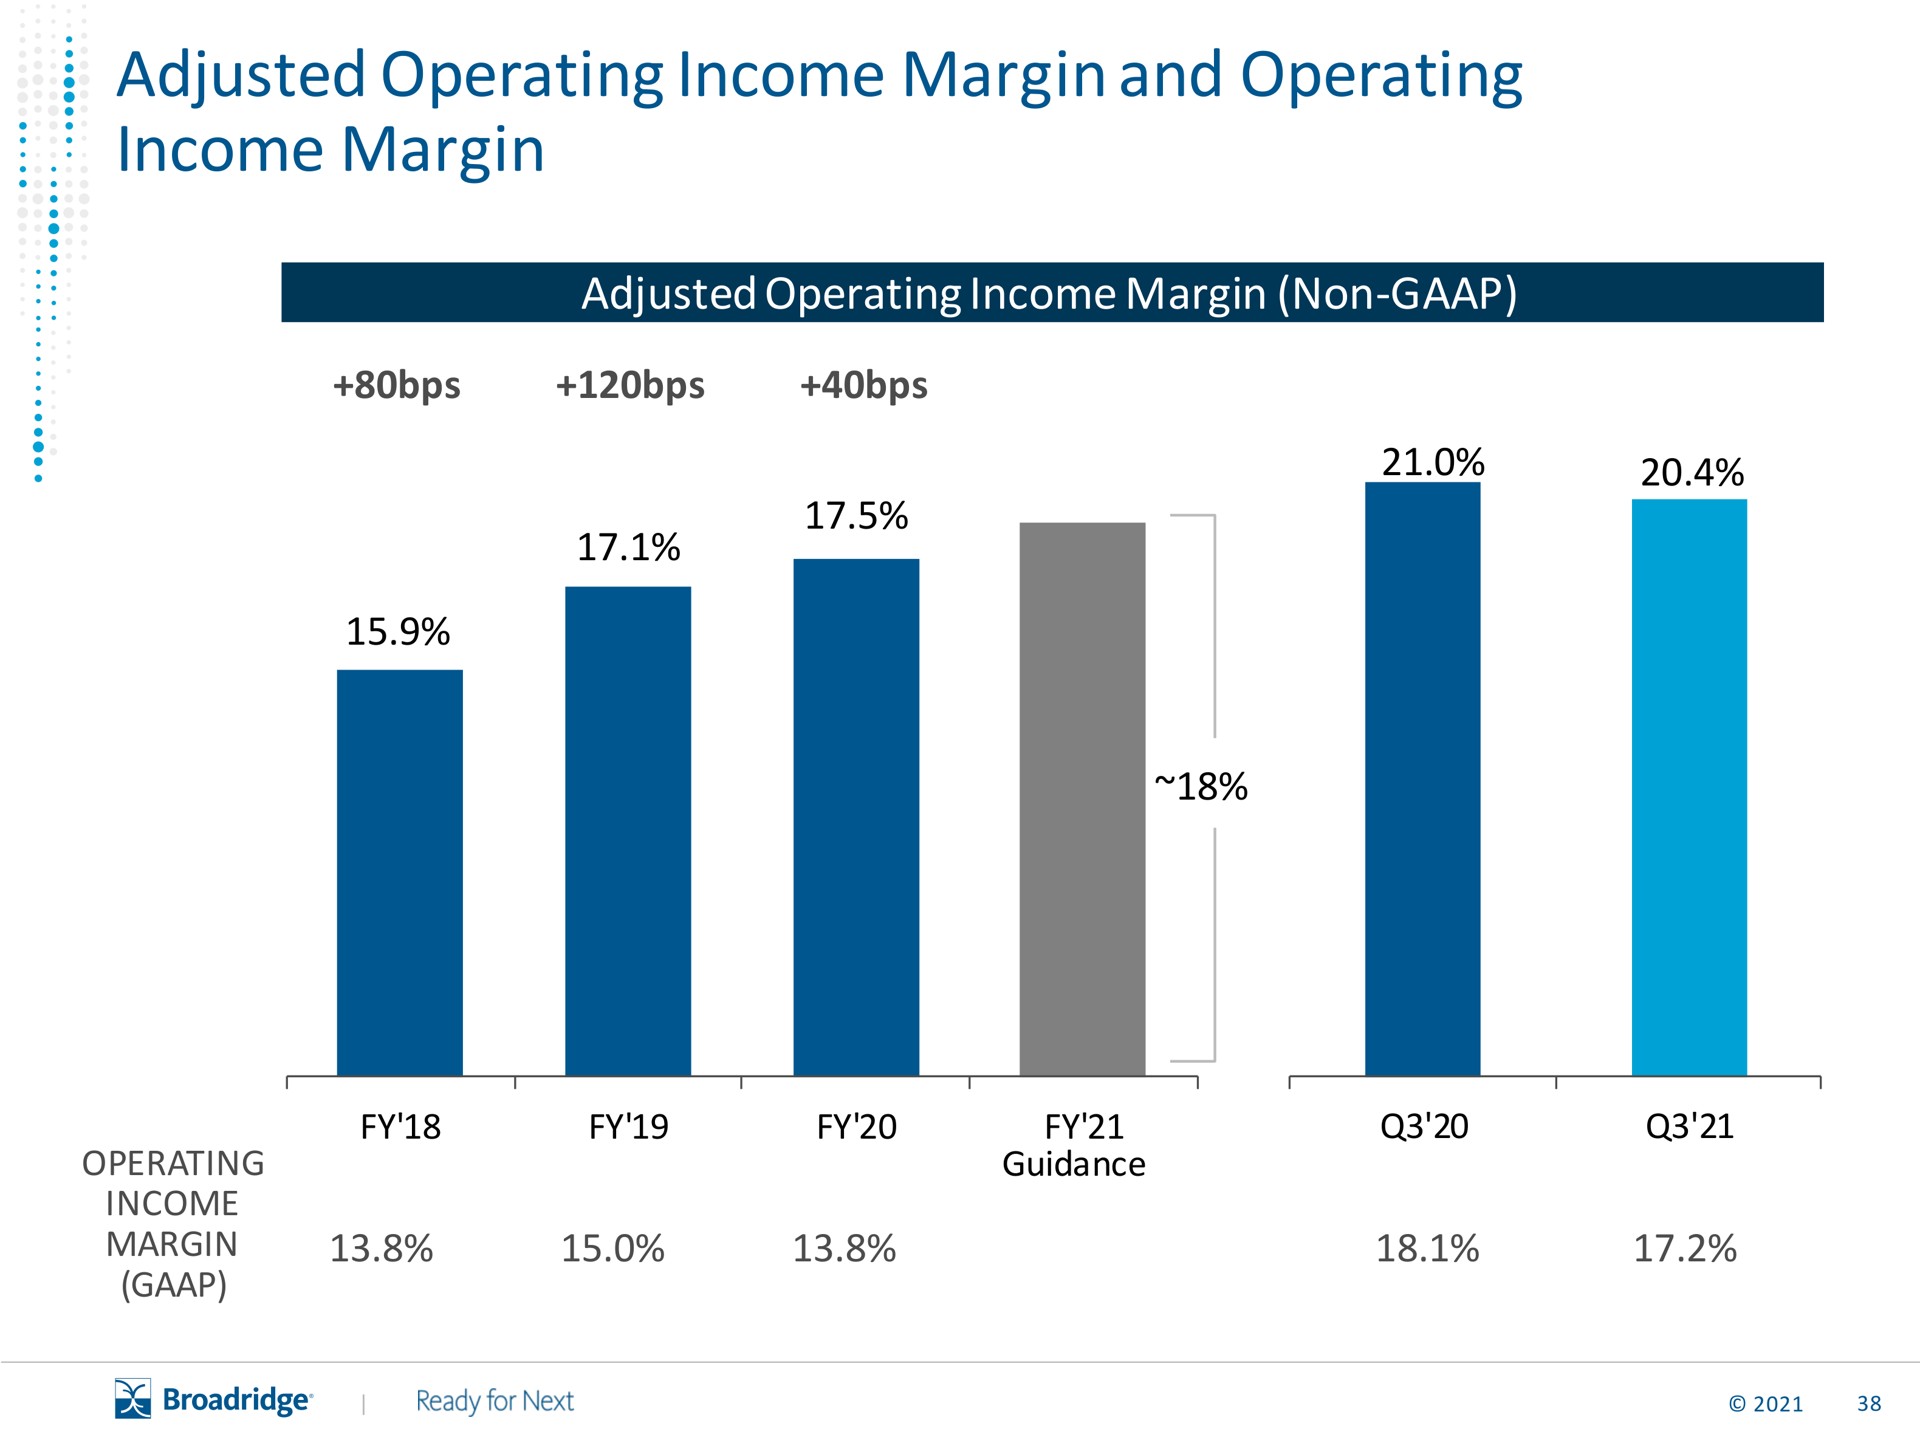 adjusted operating income margin and operating income margin | Broadridge Financial Solutions